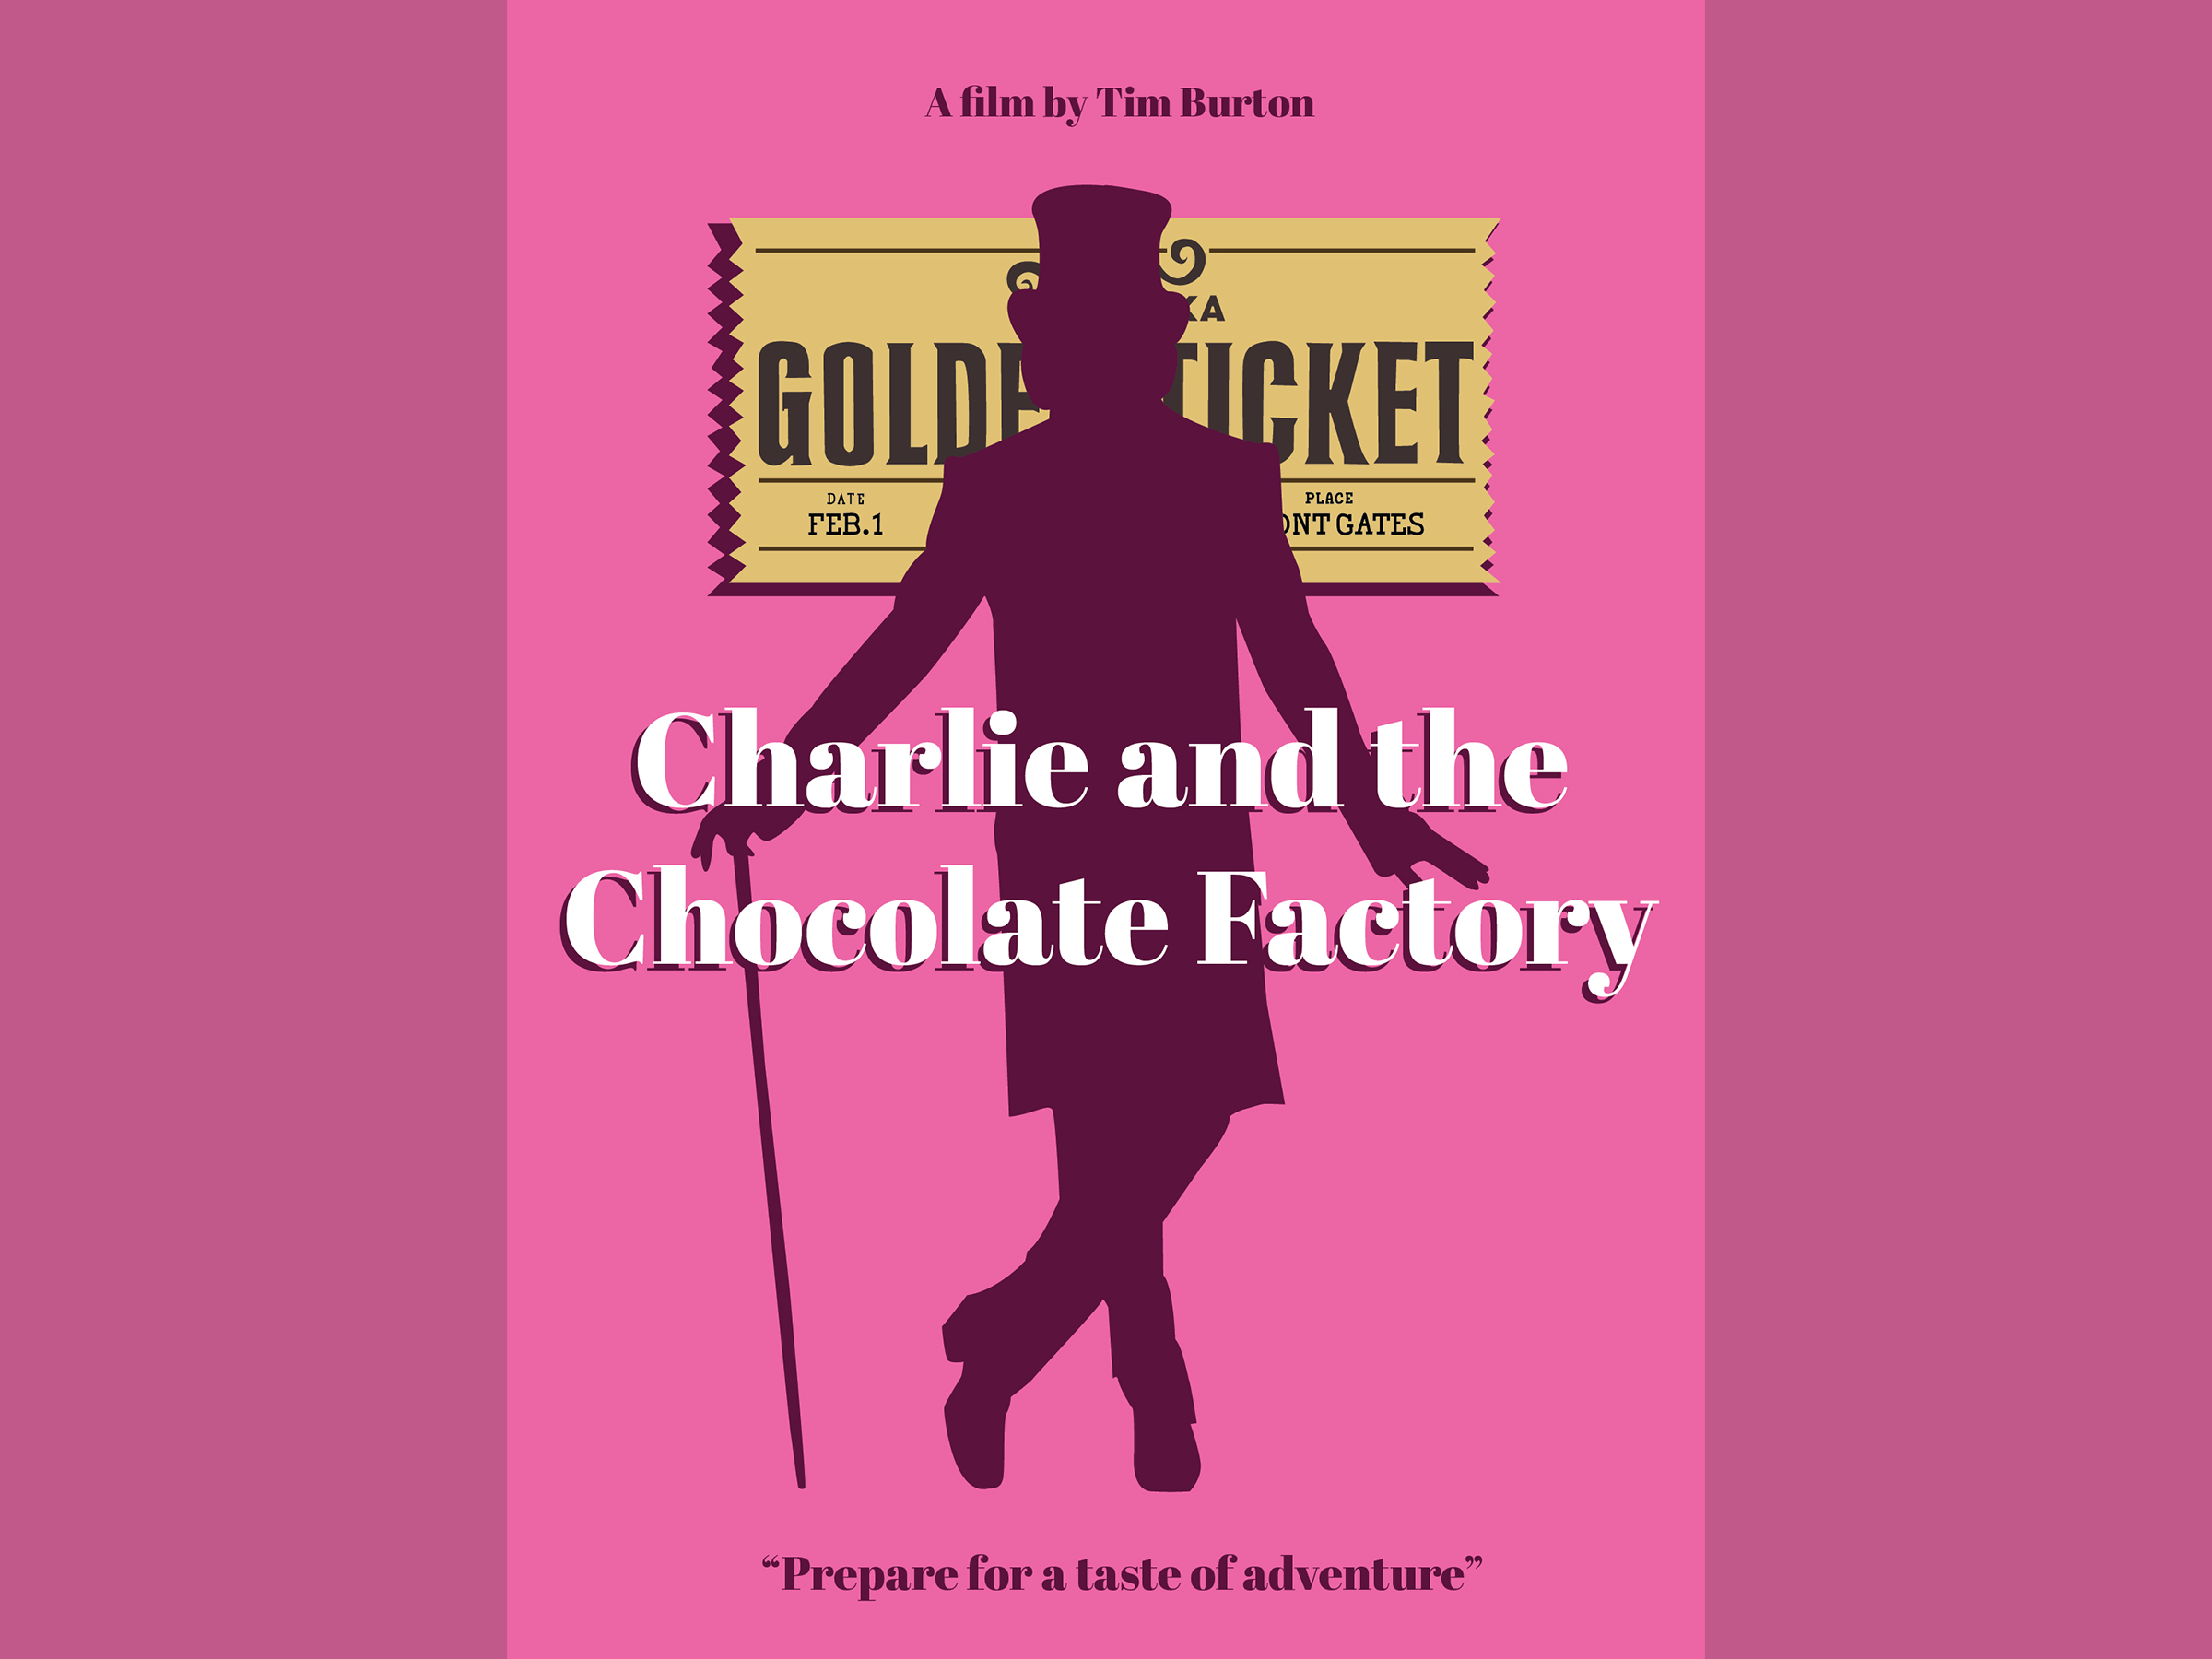 A poster of Charlie and the Chocolate Factory with a silhouette illustration and the golden ticket